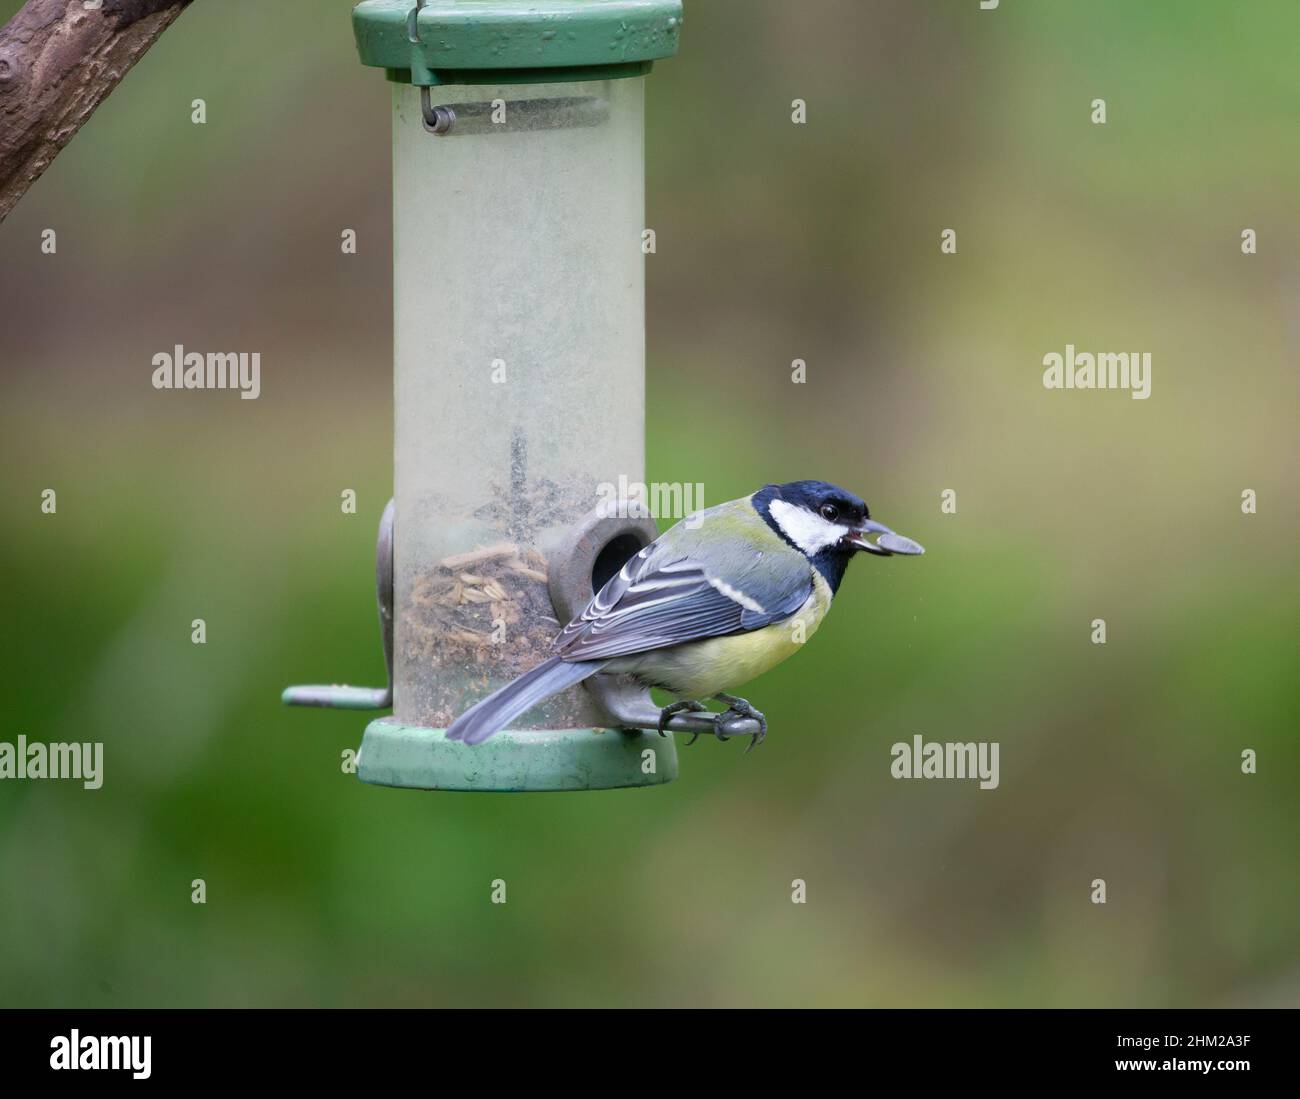 A Great Tit, Parus major, perching on a seed feeder, with a black sunflower seed in its beak against a defocussed natural background. Stock Photo